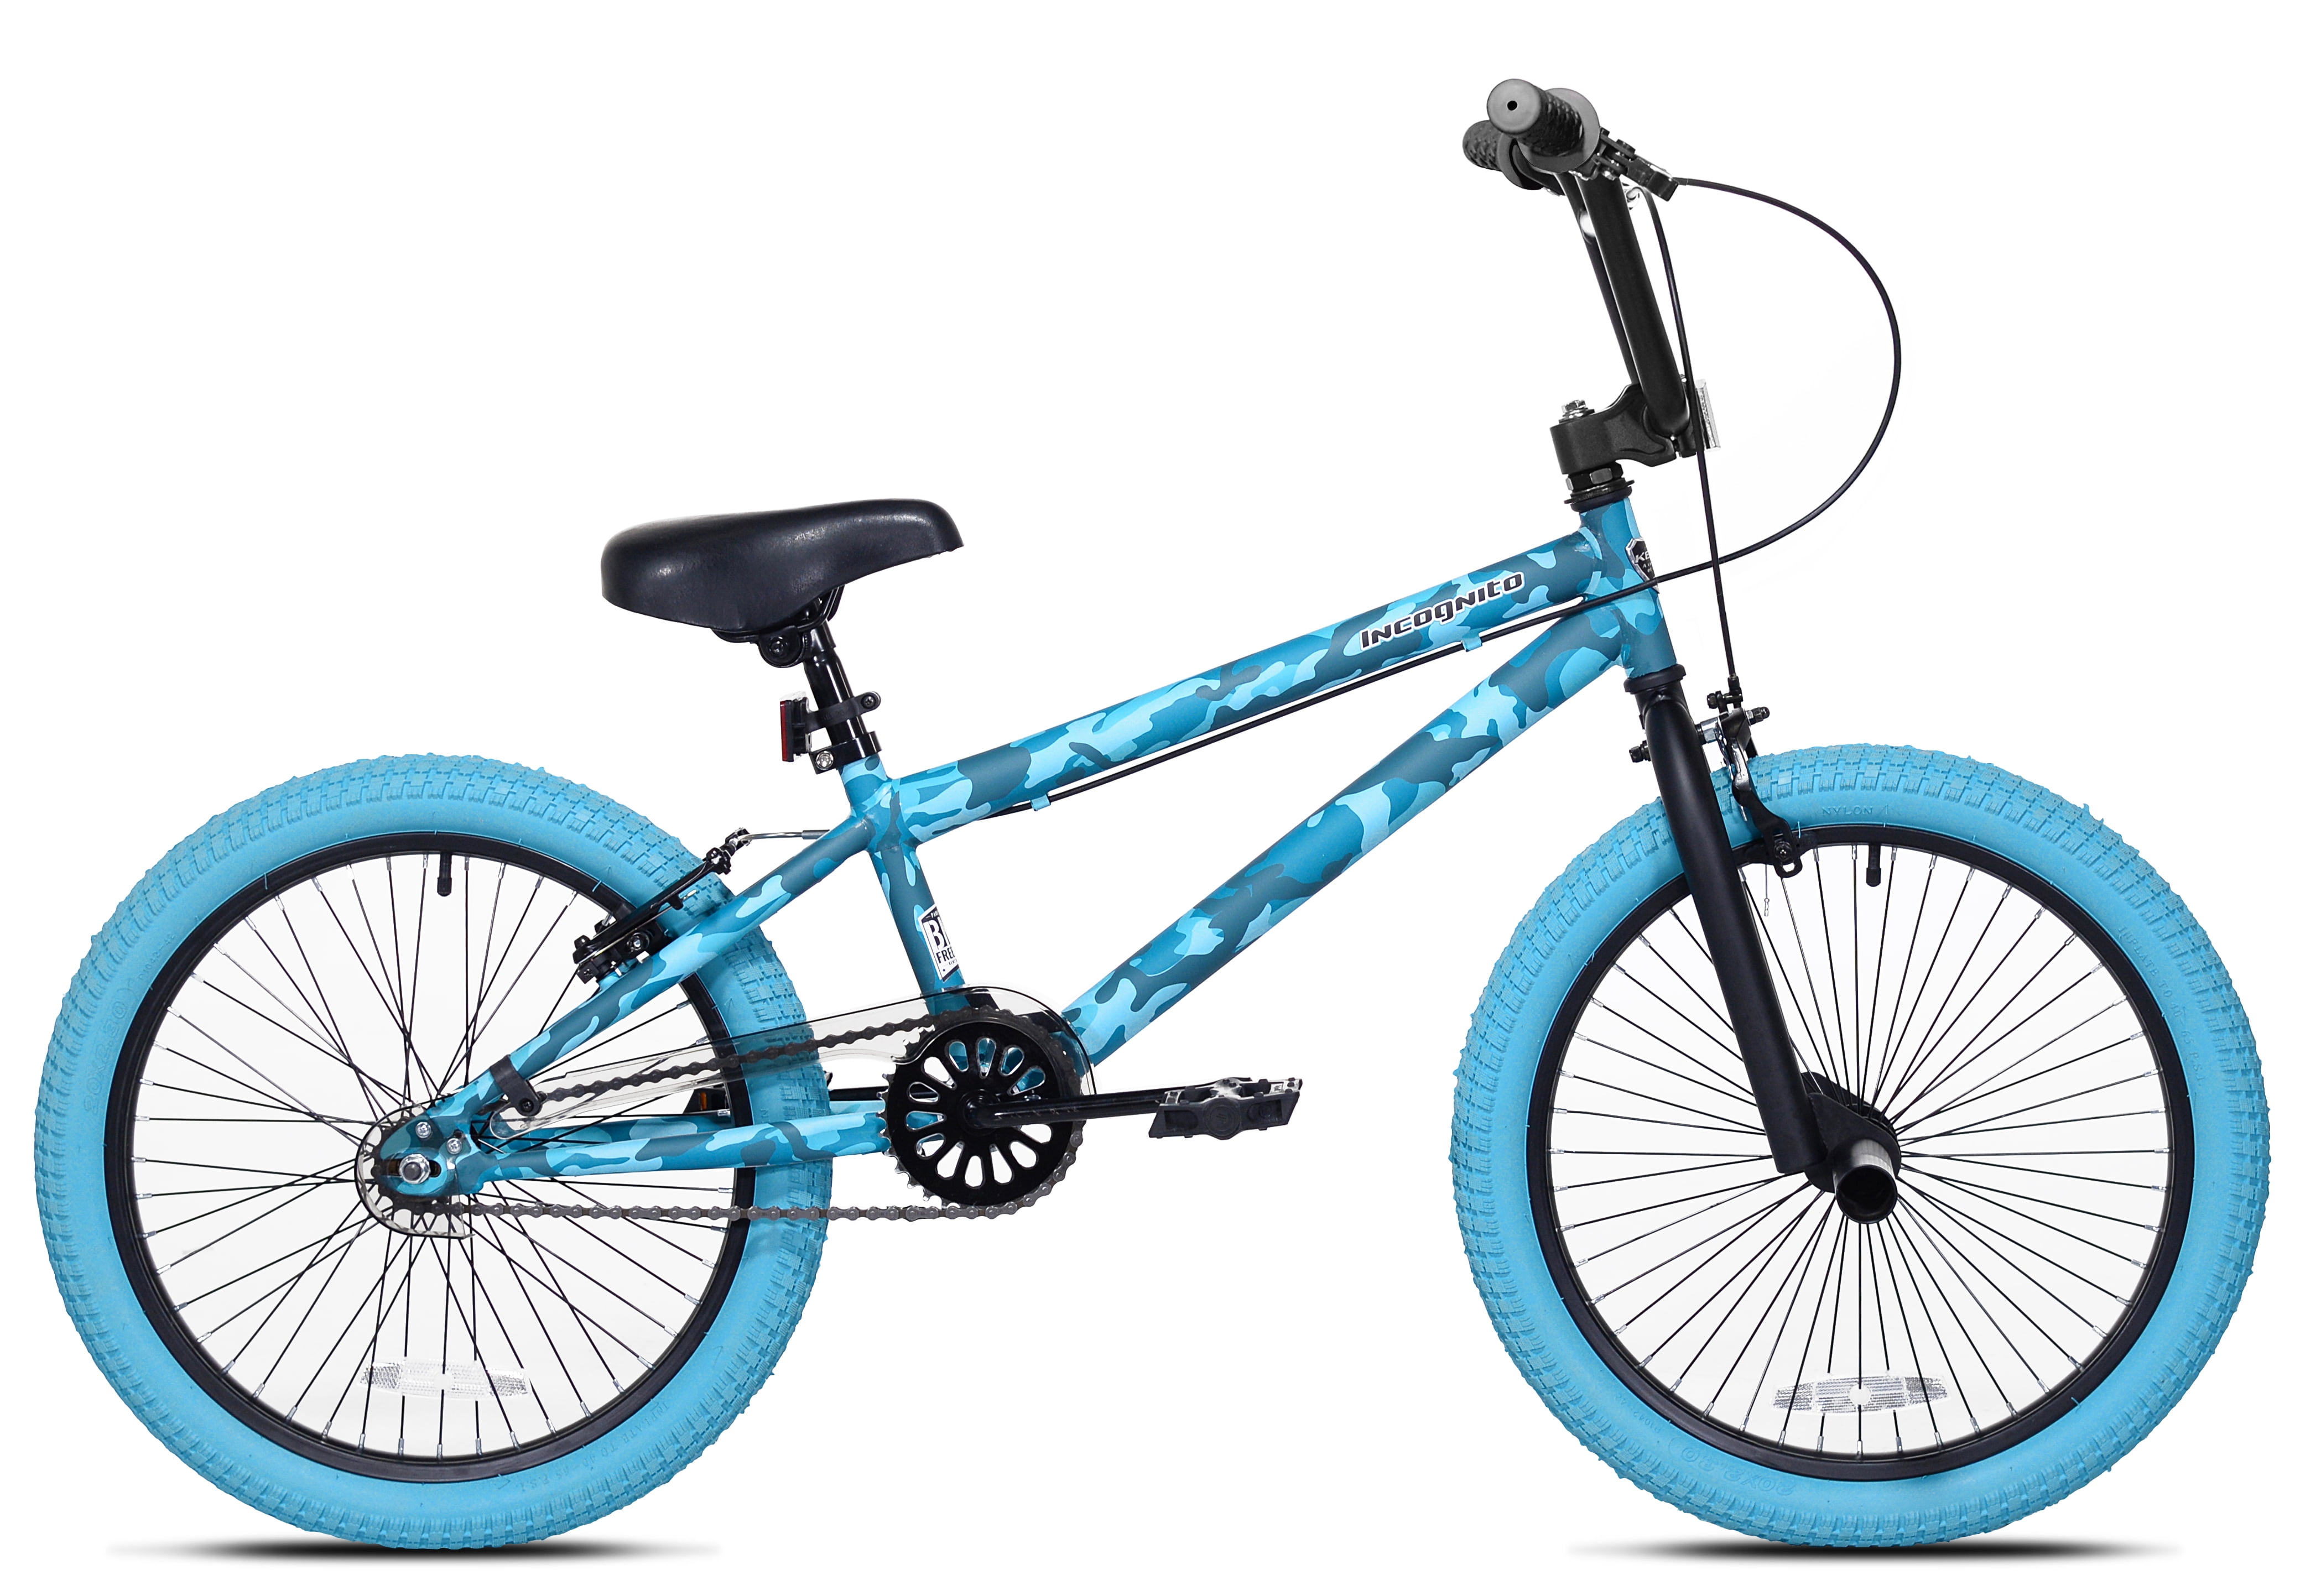 How much for a BMX bike?